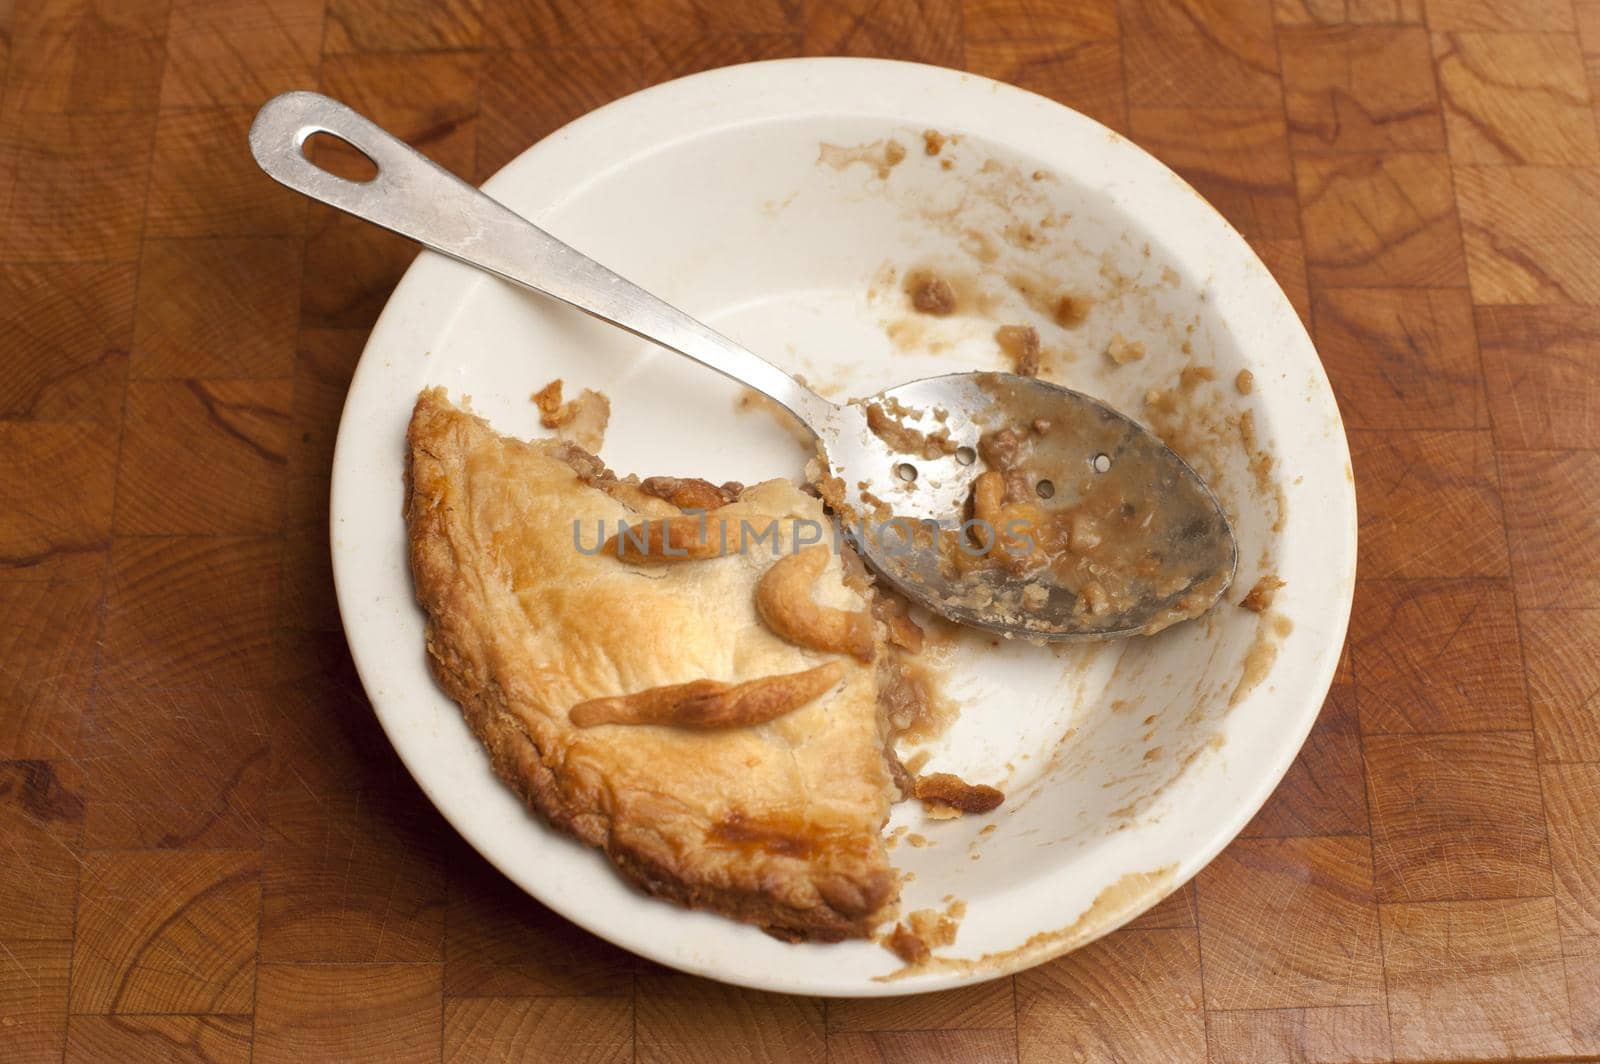 Half eaten freshly baked homemade pie with a pastry crust in a white ceramic oven dish with a messy serving spoon, high angle view